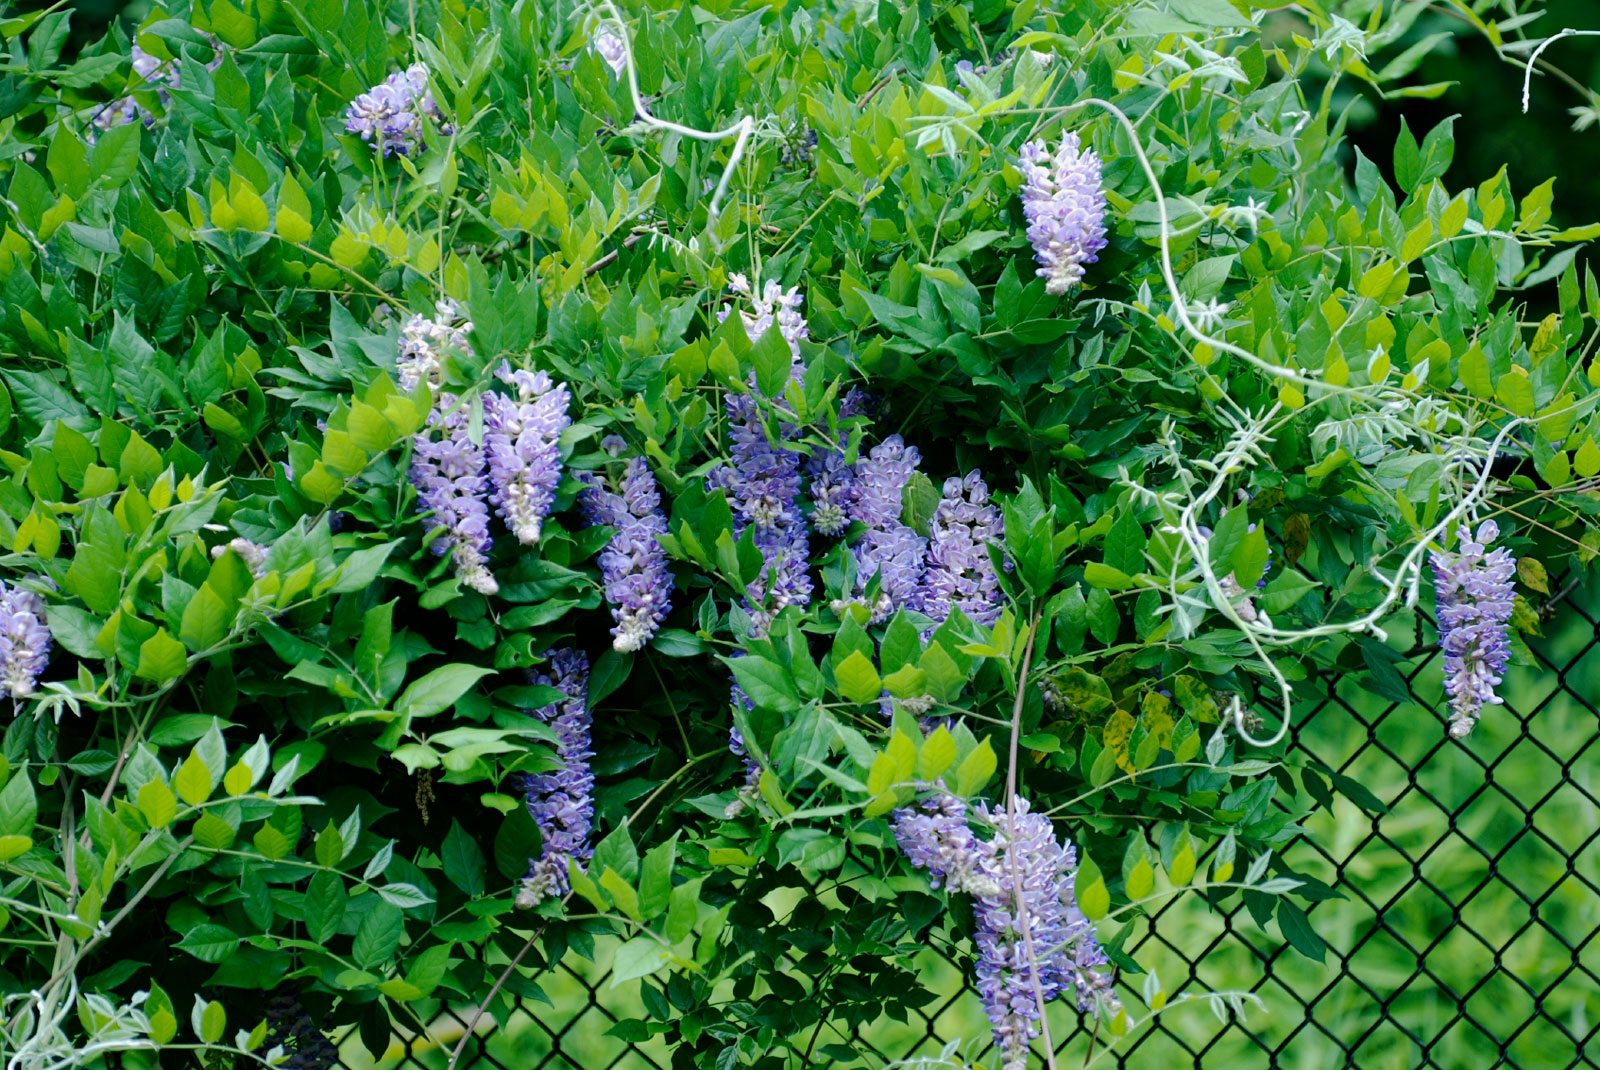 What Is The Best Climbing Plant To Cover A Fence?